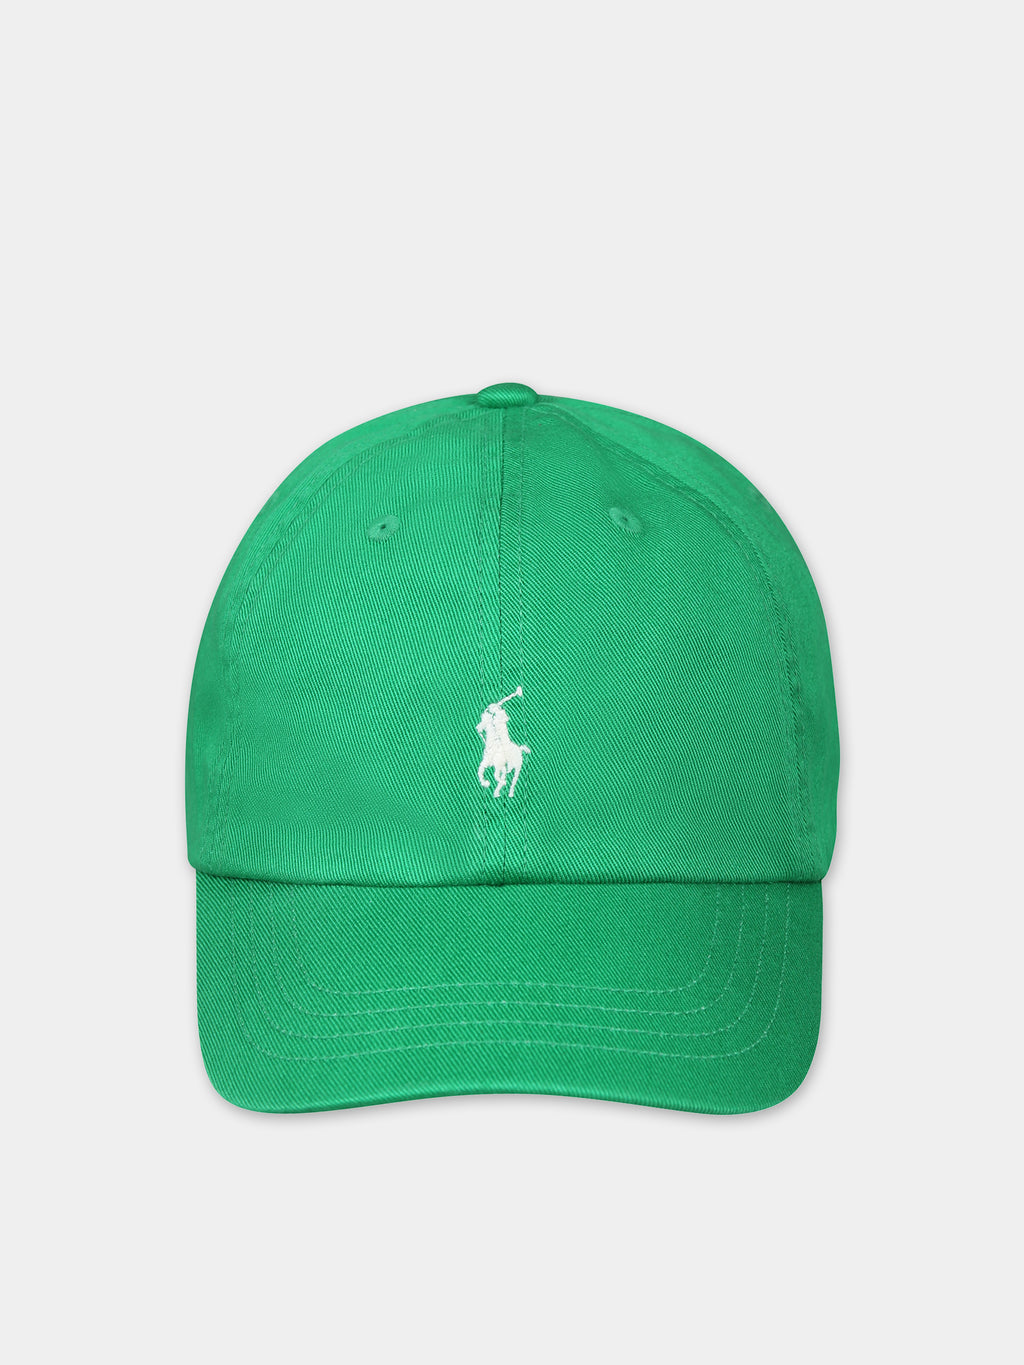 Green hat for baby boy with pony